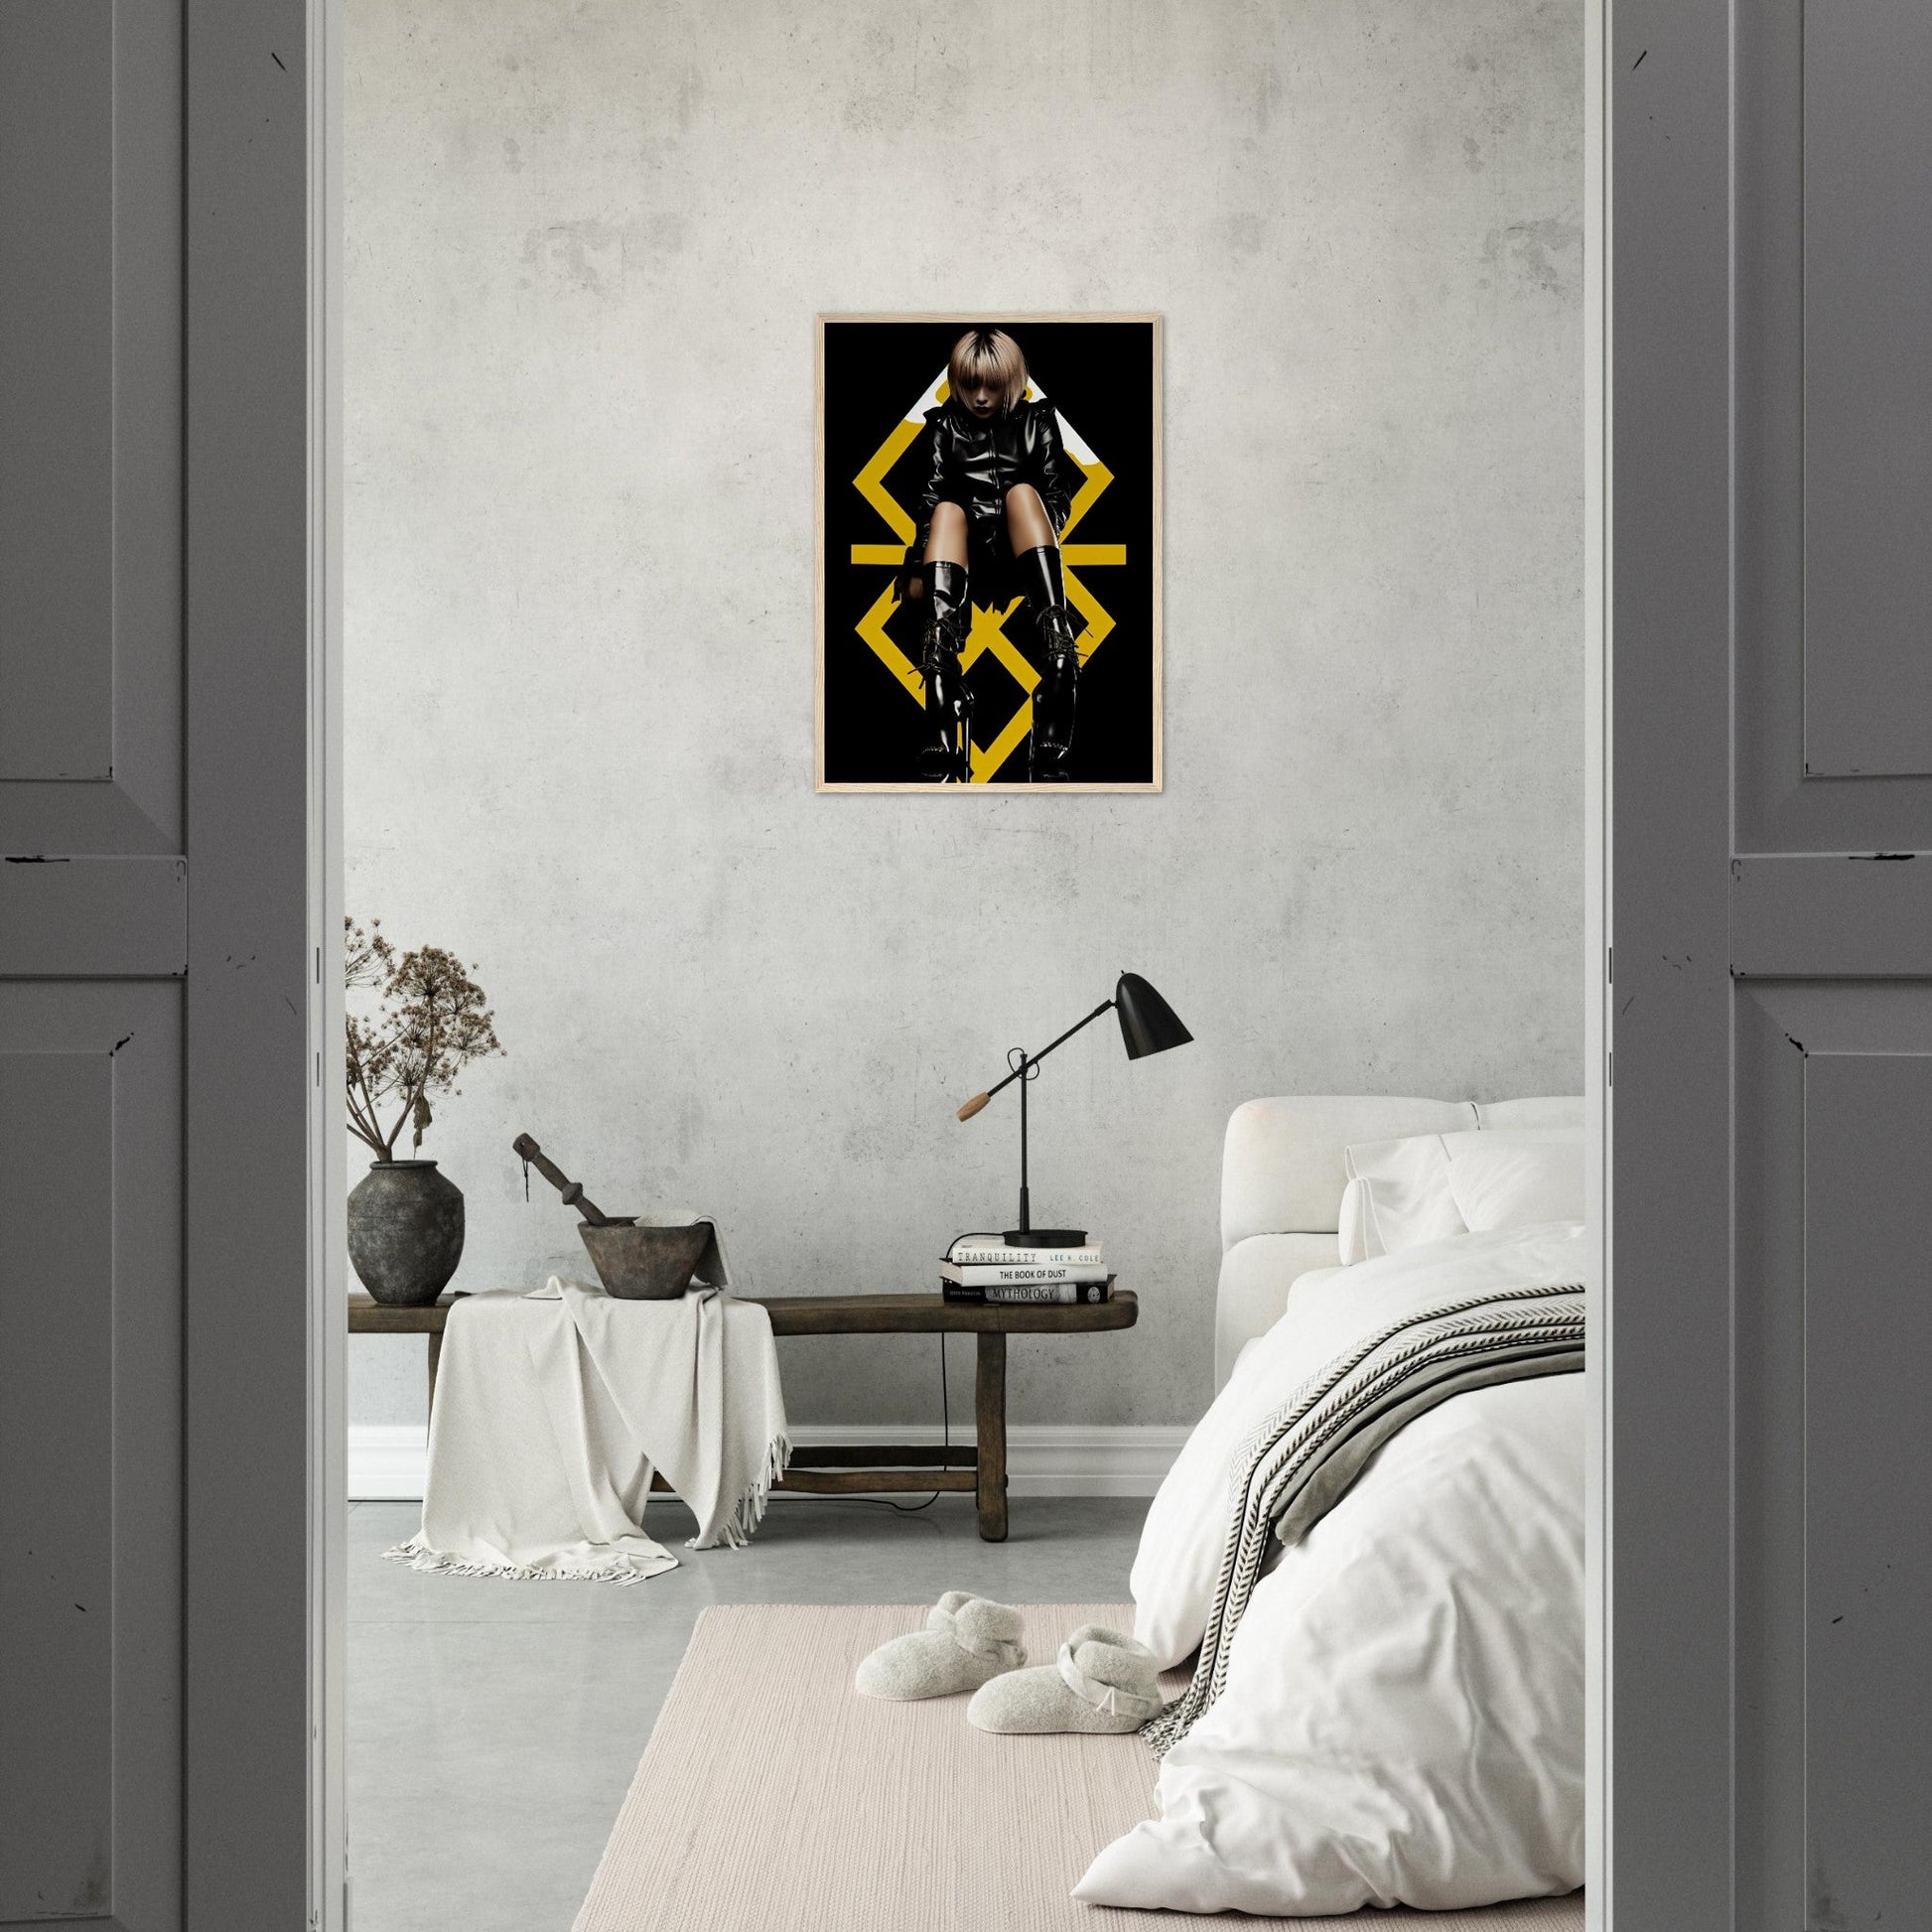 Transform your space with this Balenciwannabe The Oracle Windows™ Collection fashion wall art poster featuring a woman in a leather jacket and boots.